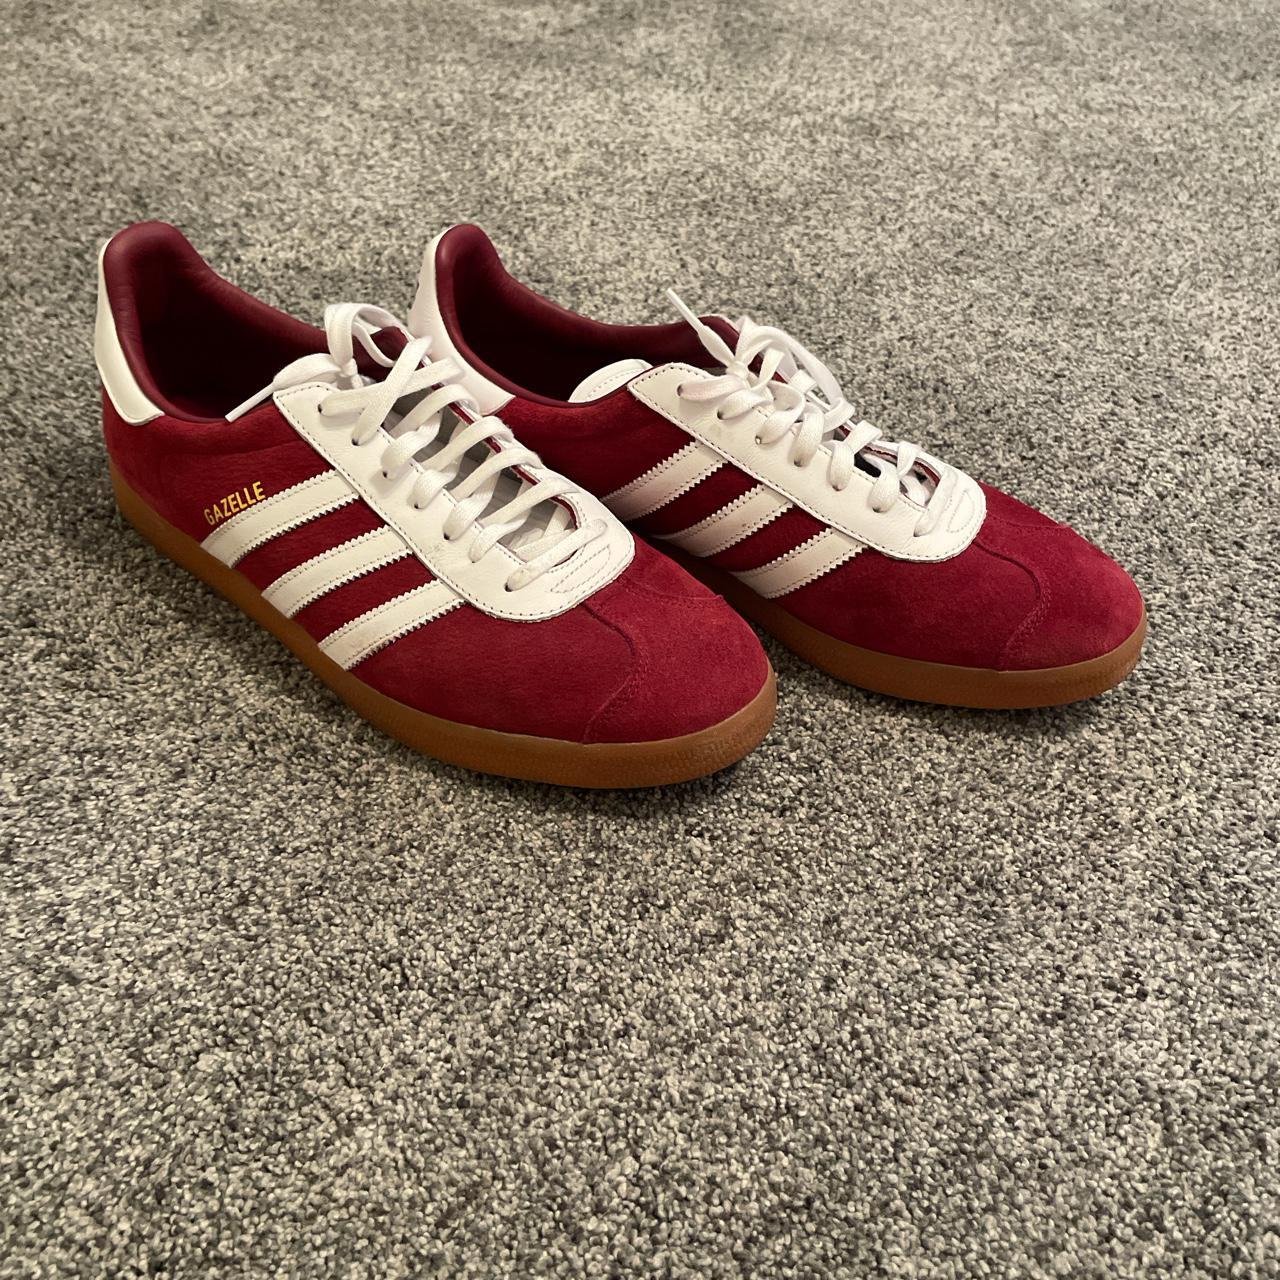 Product Image 1 - Adidas Gazelle 

Size: 11

Condition: Overall